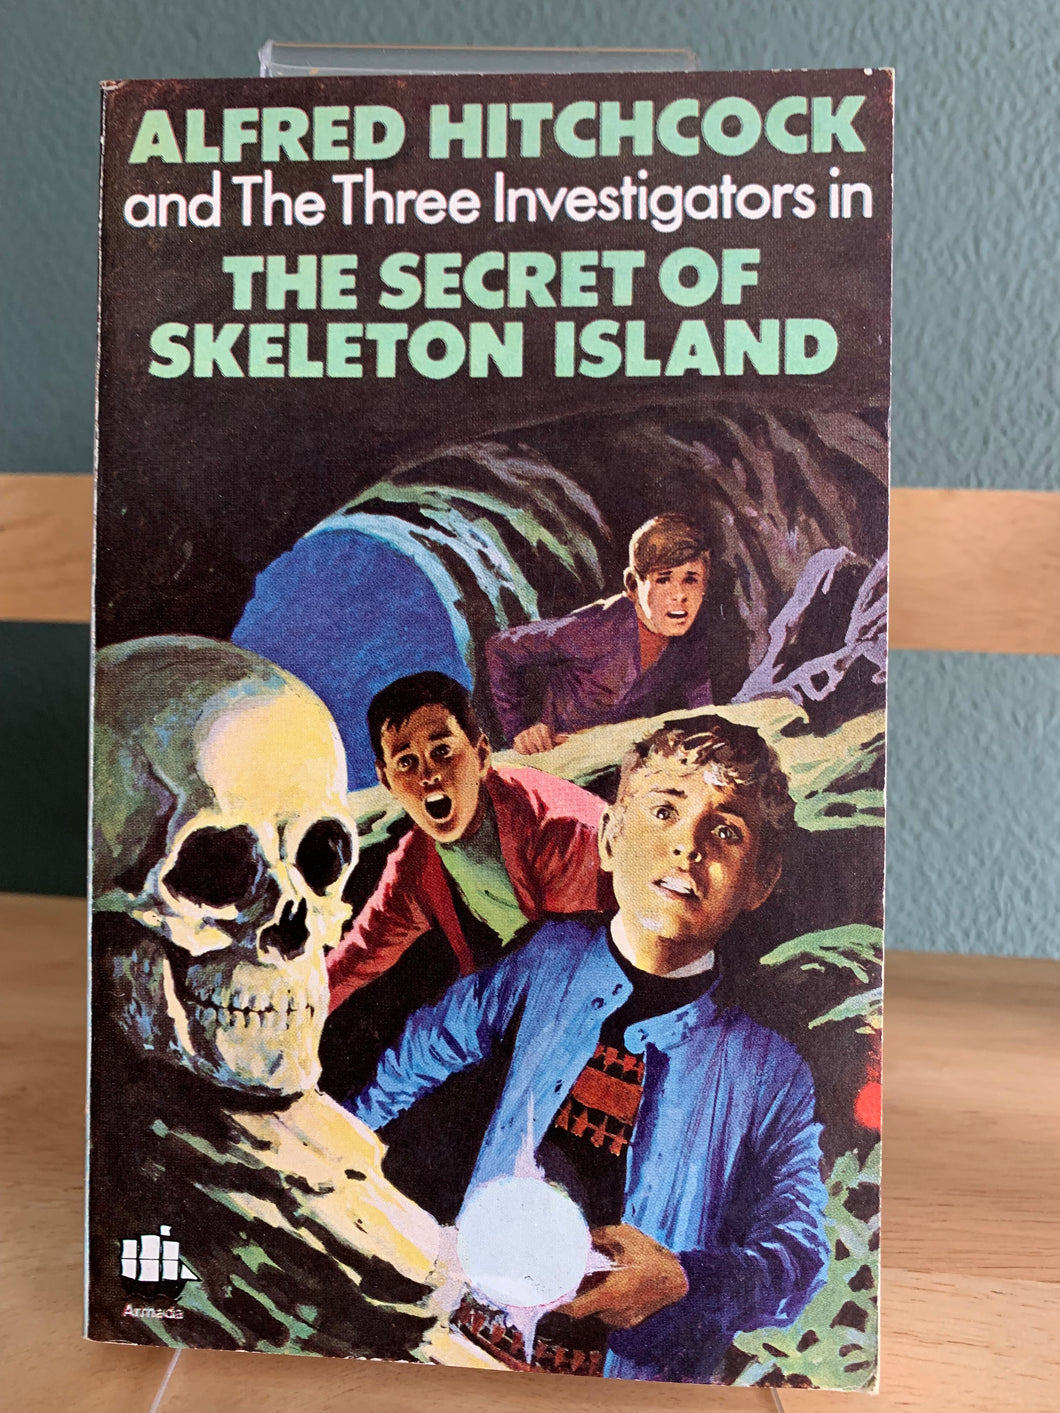 Alfred Hitchcock and The Three Investigators in the Secret of Skeleton Island